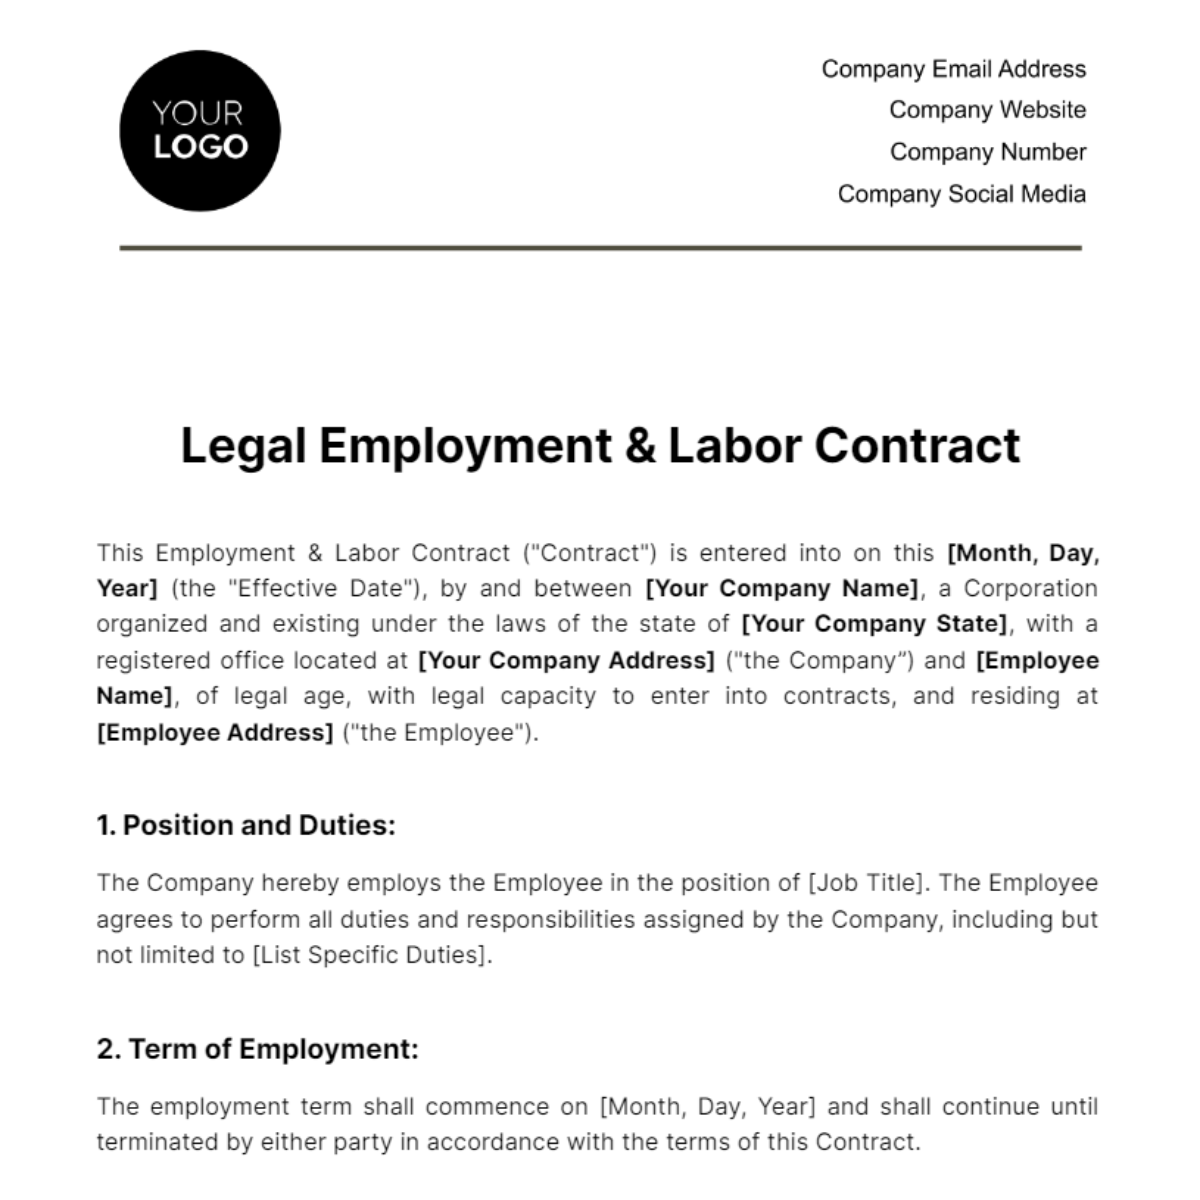 Free Legal Employment & Labor Contract Template